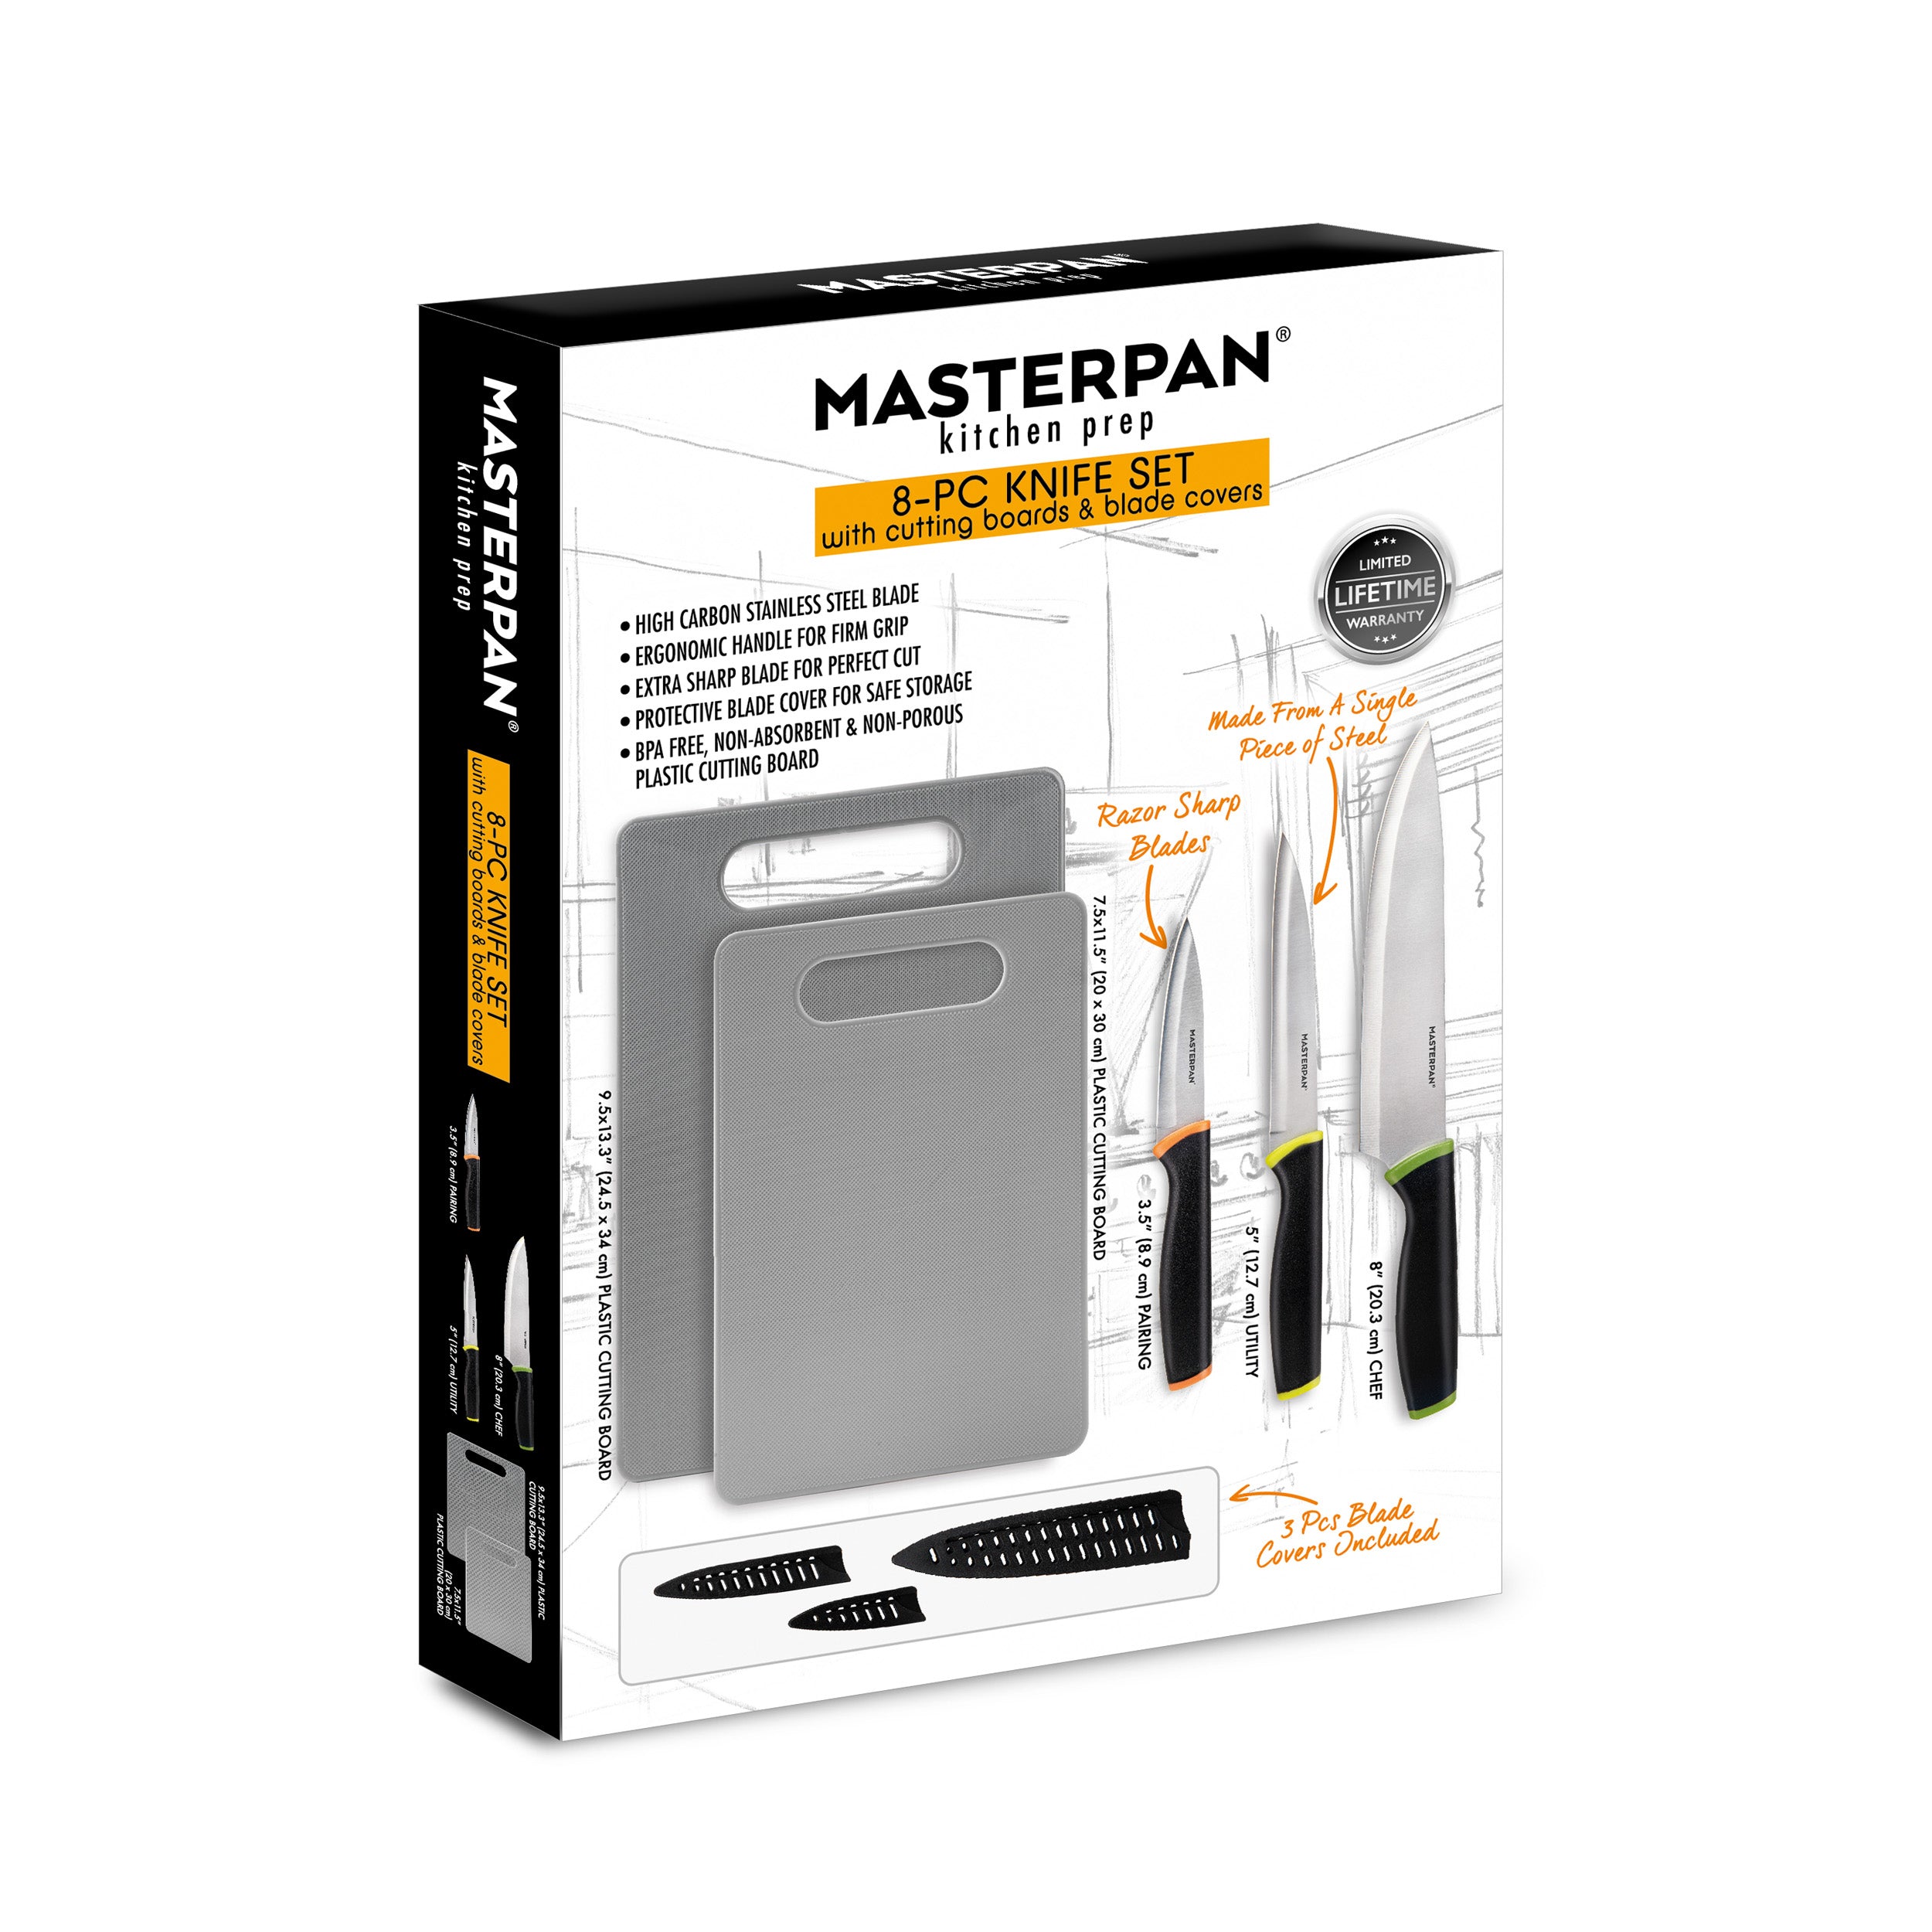 MASTERPAN Kitchen Prep 12-pc Knife Set With Protective Blade Covers,  Stainless Steel Blade and Non-Slip Handle